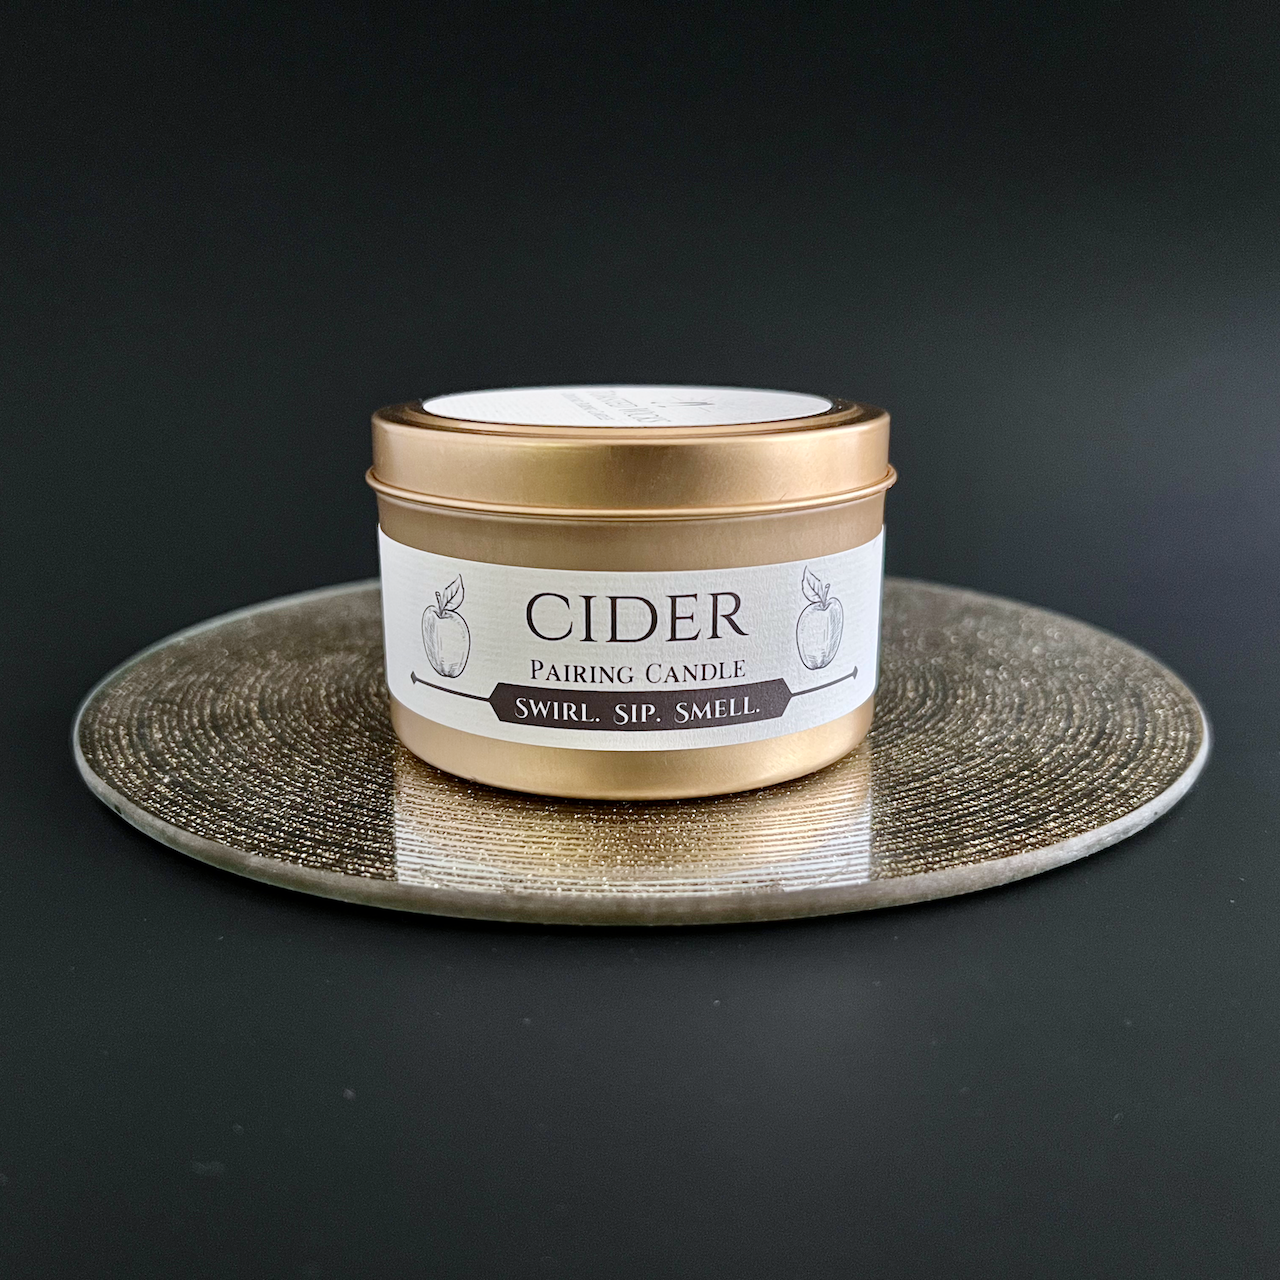 Cider Pairing Candle Gold Tin